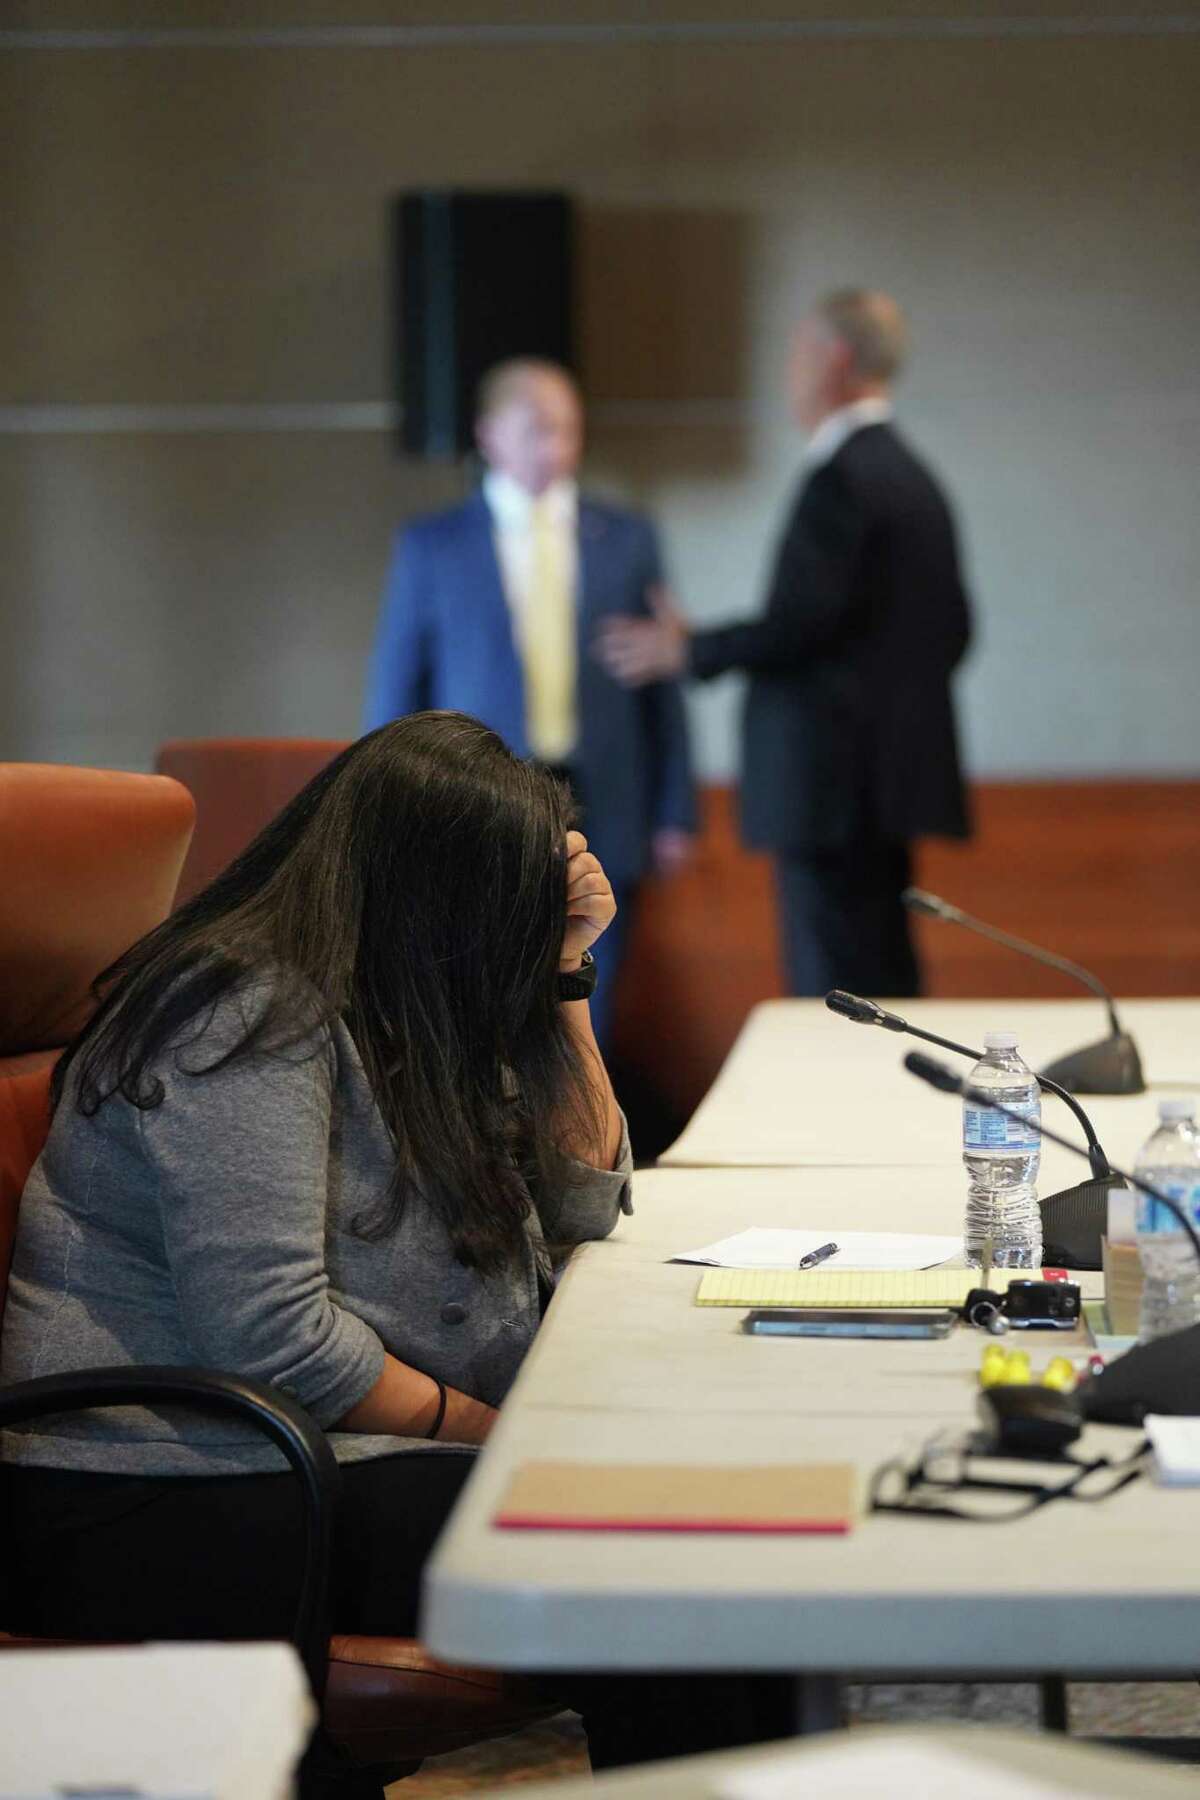 Former San Antonio police officer Elizabeth Montoya keeps her head down as her attorney, Robert Leonard, speaks with Assistant City Attorney Michael Urbis Tuesday morning during an arbitration hearing on her appeal of an indefinite suspension from the San Antonio Police Department.